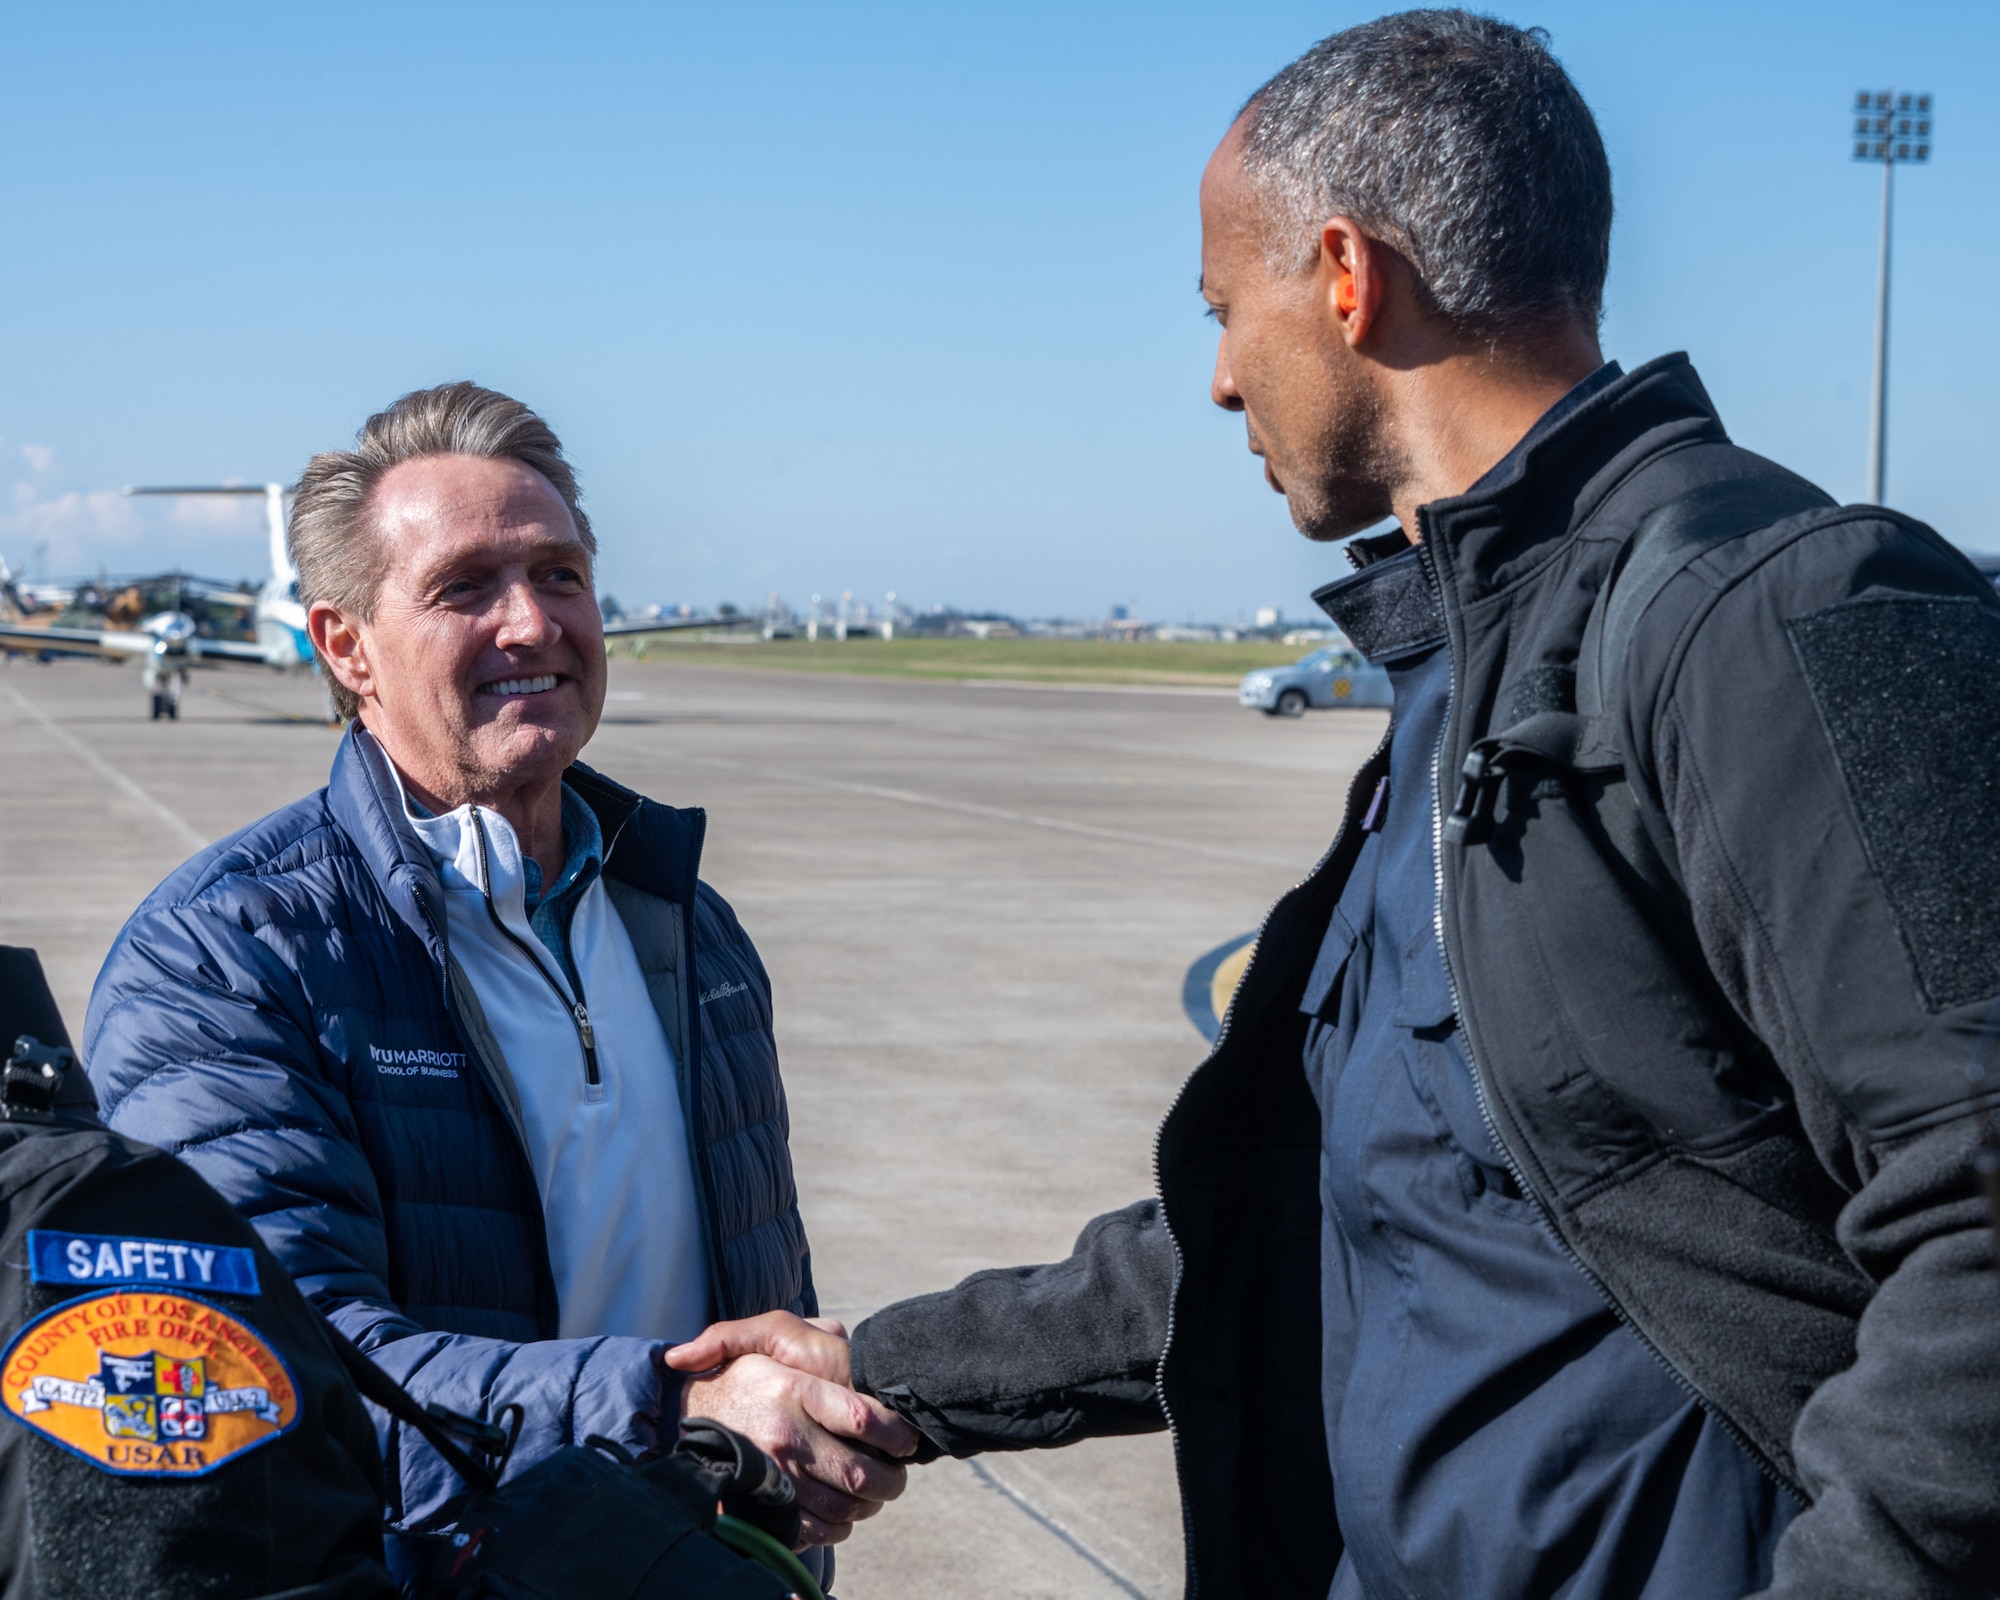 U.S. Ambassador Jeffry Flake, U.S. Ambassador to Türkiye, left, shakes hands with a member of the United States Agency for International Development’s Disaster Assistance Response Team, right, during their arrival at Incirlik Air Base, Türkiye, Feb 8, 2023. Ambassador Flake visited Incirlik AB to greet members of the USAID team, following a series of earthquakes that struck central-southern Türkiye on Feb 6, 2023. As Ambassador to Türkiye, Flake holds the highest civilian position as The Chief of Mission, and impacts the communication and resources of U.S. personnel, advancing the U.S. foreign policy goals. As a fellow NATO ally, the U.S. Government mobilized personnel to assist in Türkiye in their response efforts. (U.S. Air Force photo by Senior Airman David D. McLoney)